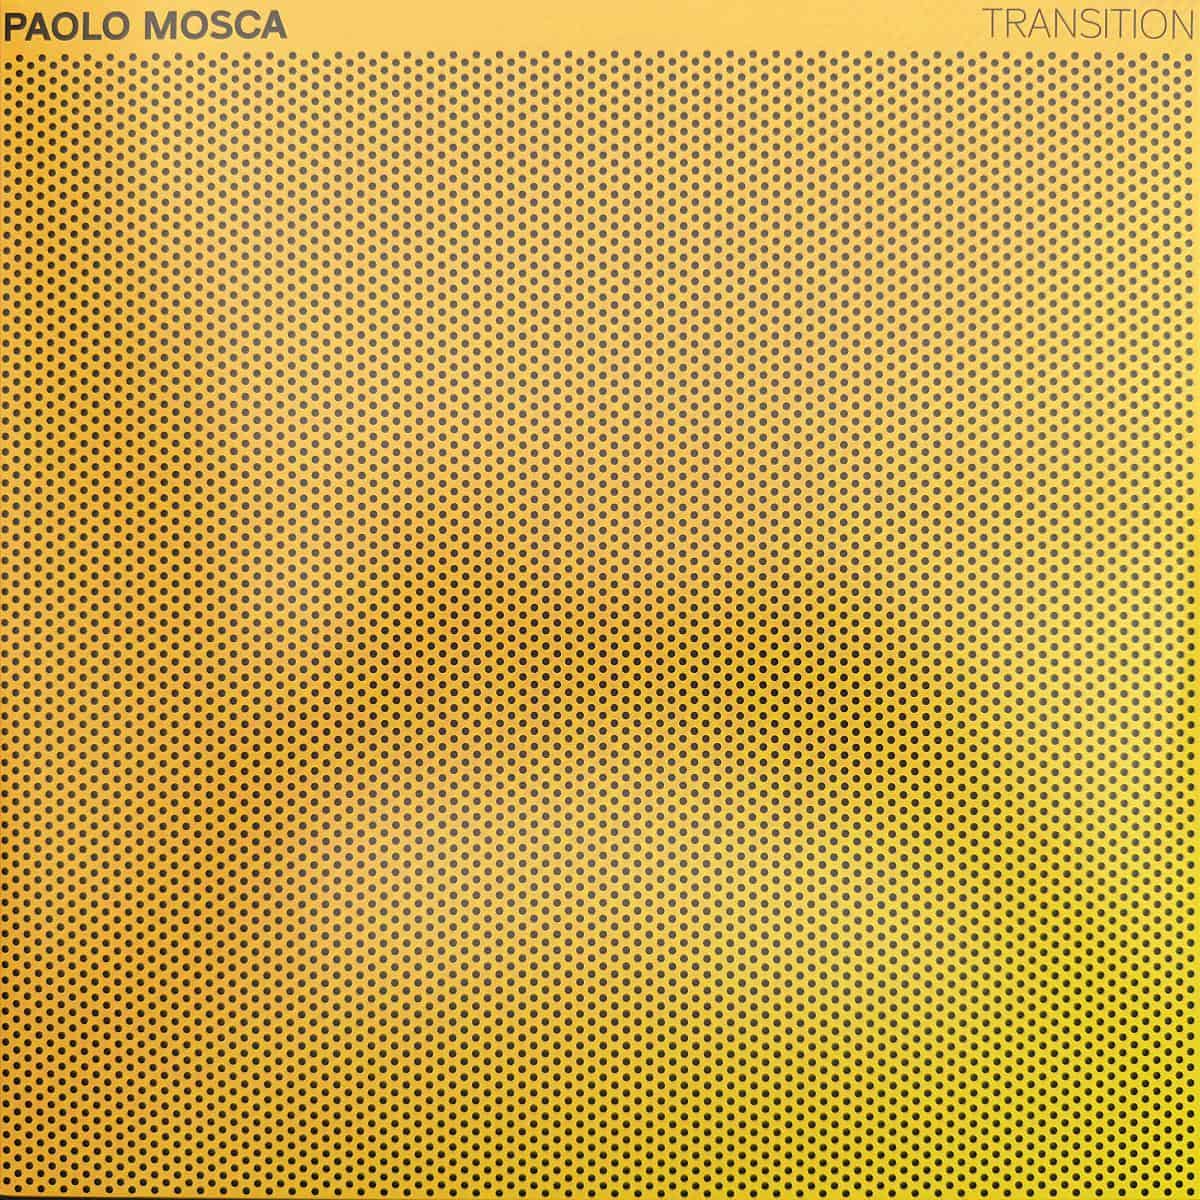 Download Paolo Mosca - Transition on Electrobuzz